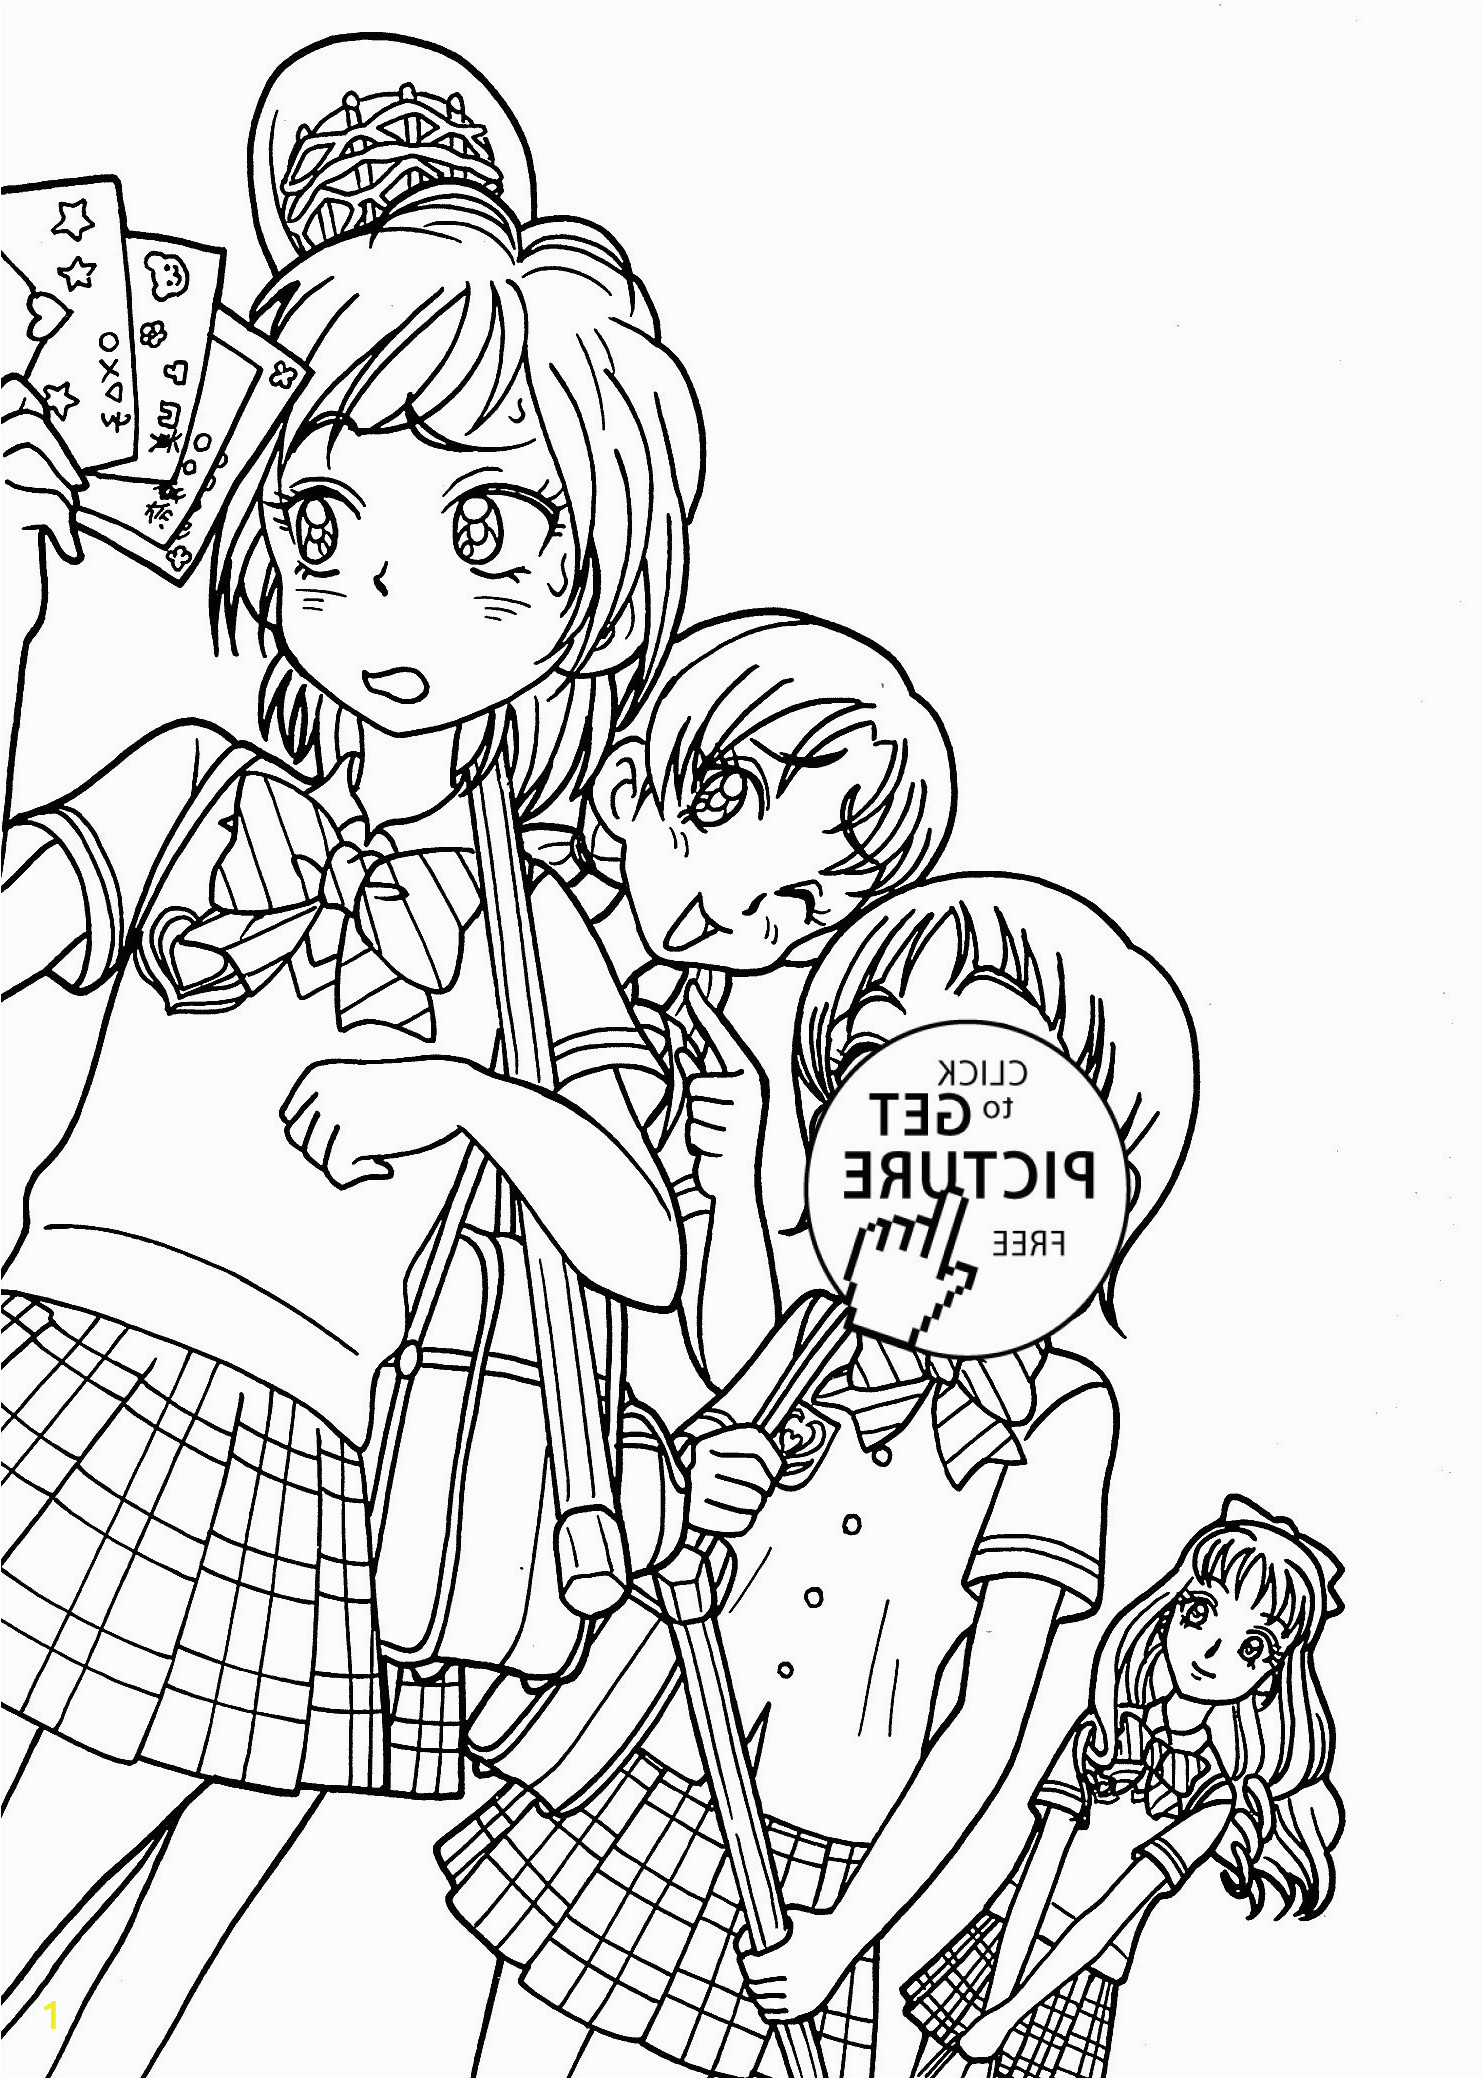 american girl doll coloring page elegant photos lovely anime boy and girl coloring pages c trade of american girl doll coloring page